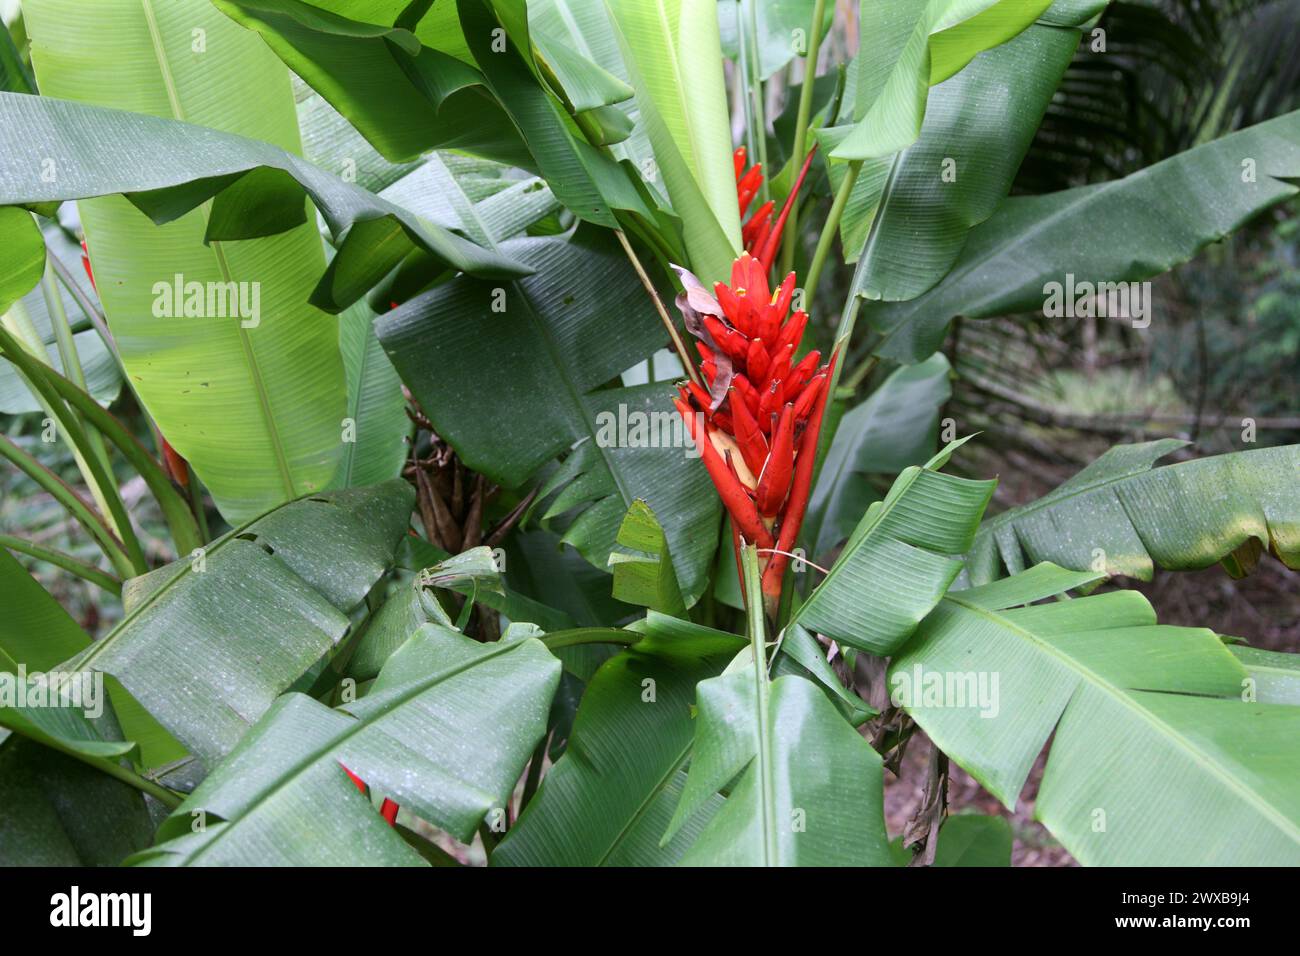 Scarlet Banana or Red-flowering Banana, Heliconia, Musa coccinea, Musaceae. Costa Rica. Stock Photo